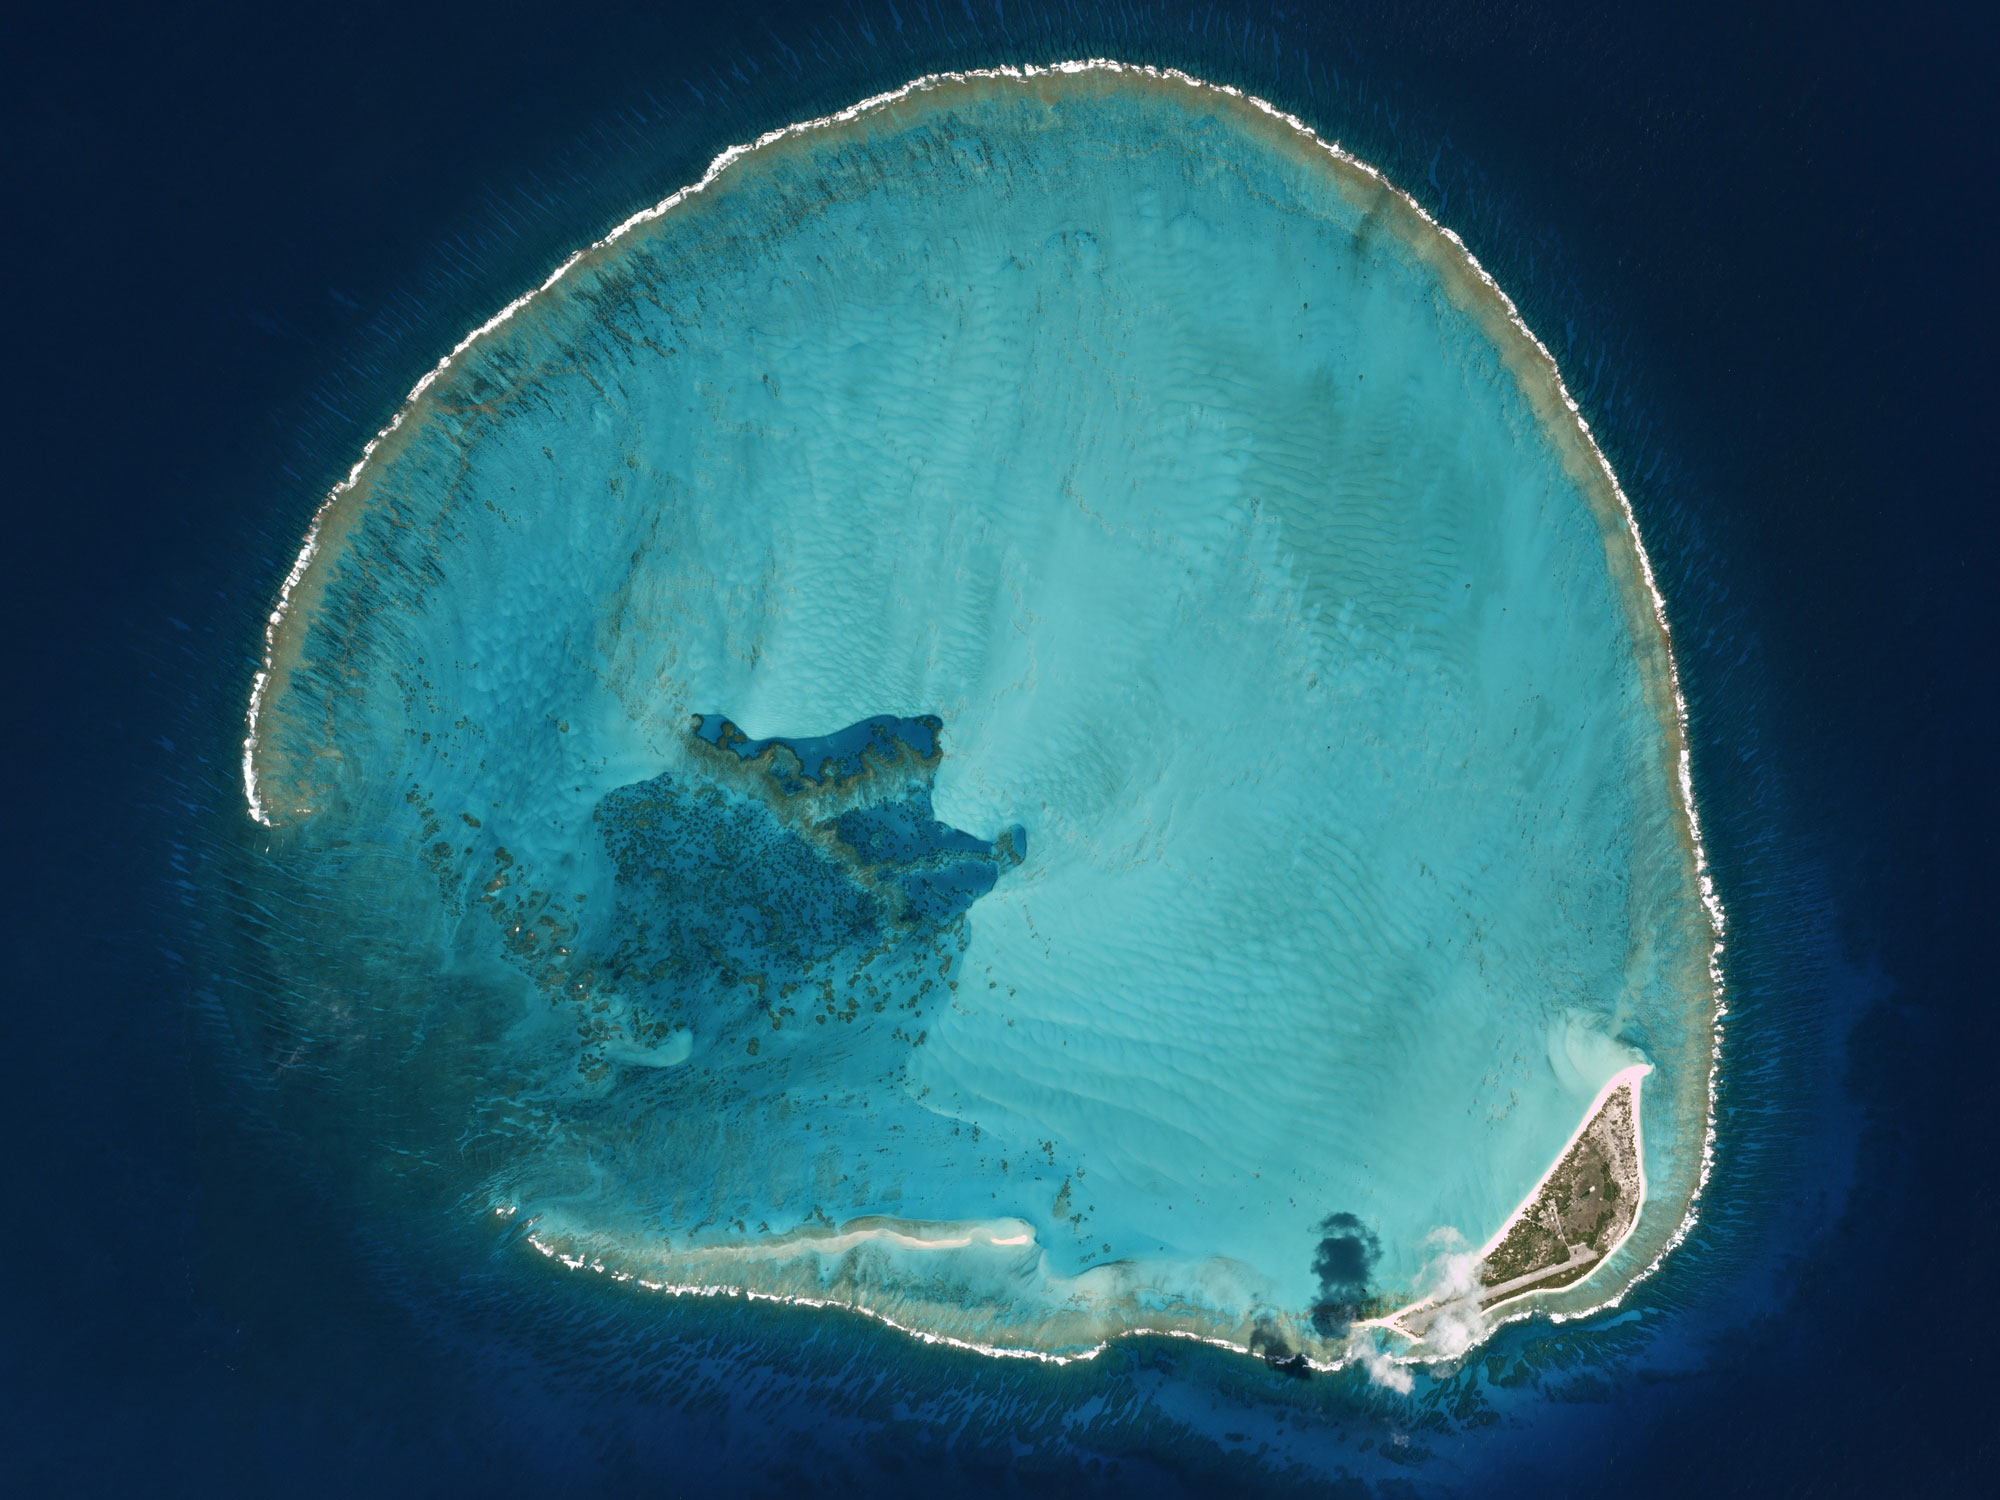 Photograph of Kure Atoll, probably from a satellite. The atoll looks like a thin white ring of land with dark water surrounding it and bright blue water within. In the lower right side of the Atoll is a larger piece of land with an airstrip.